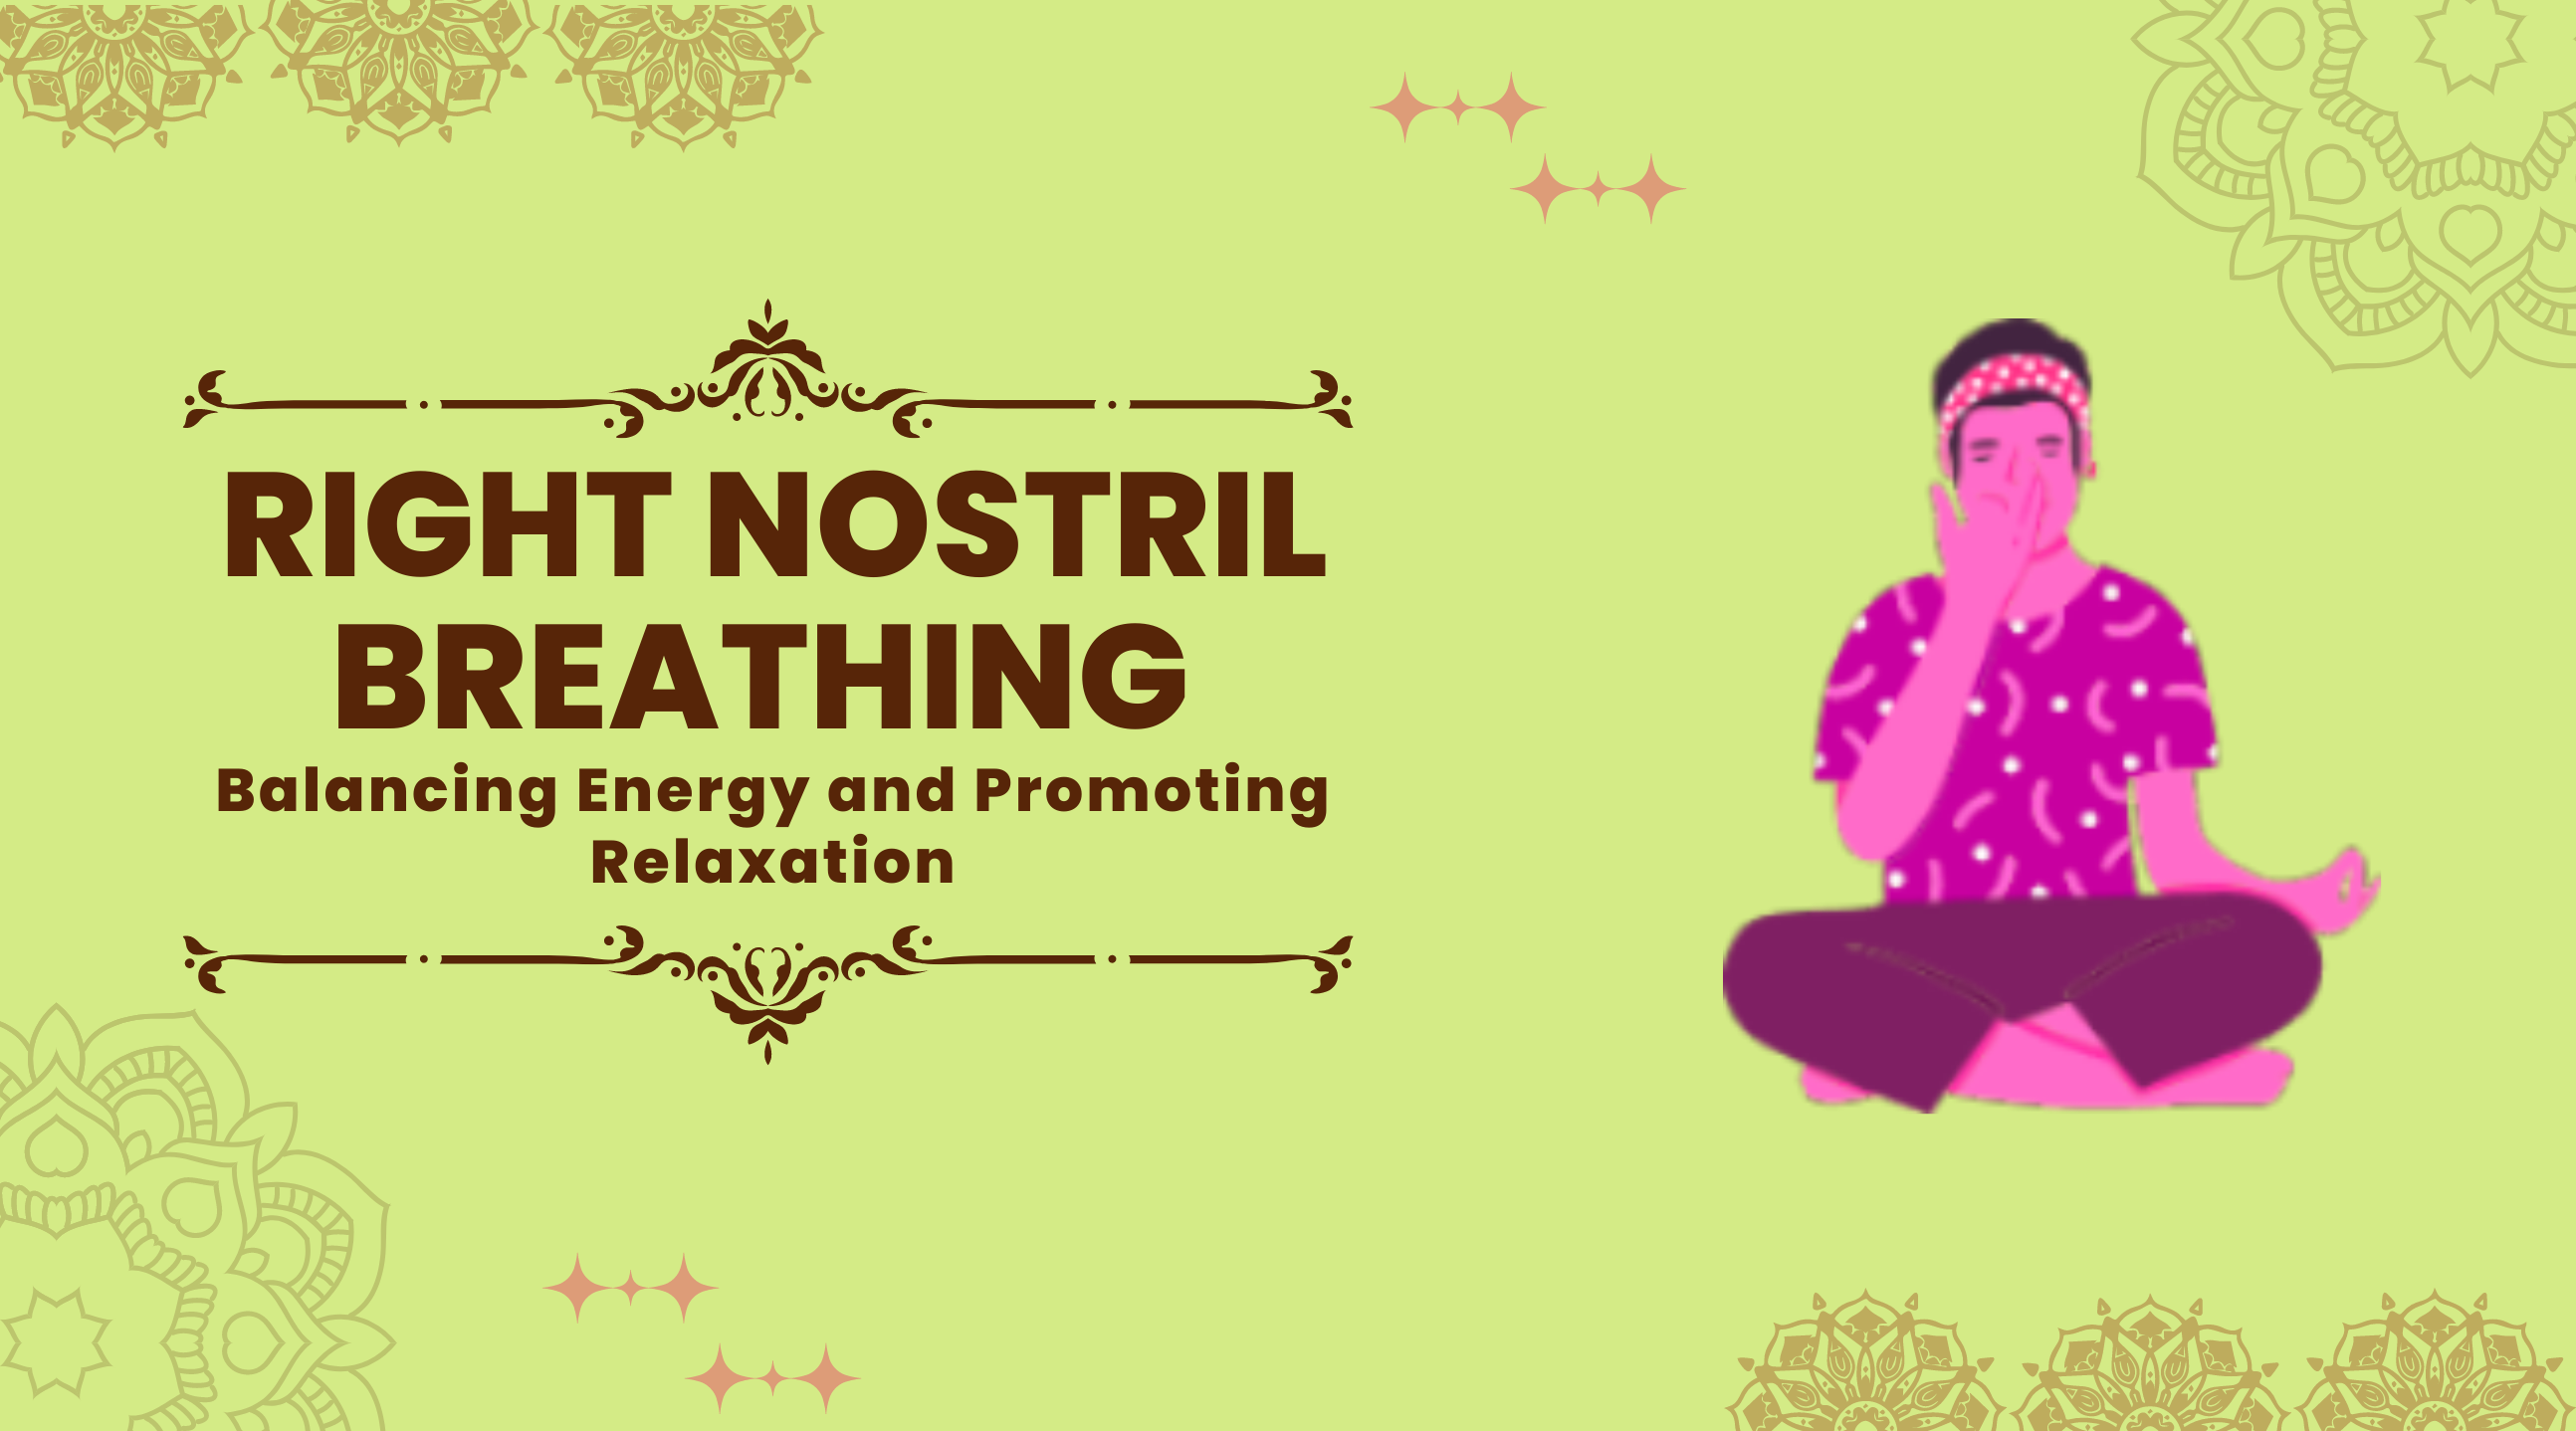 Right Nostril Breathing: Balancing Energy and Promoting Relaxation